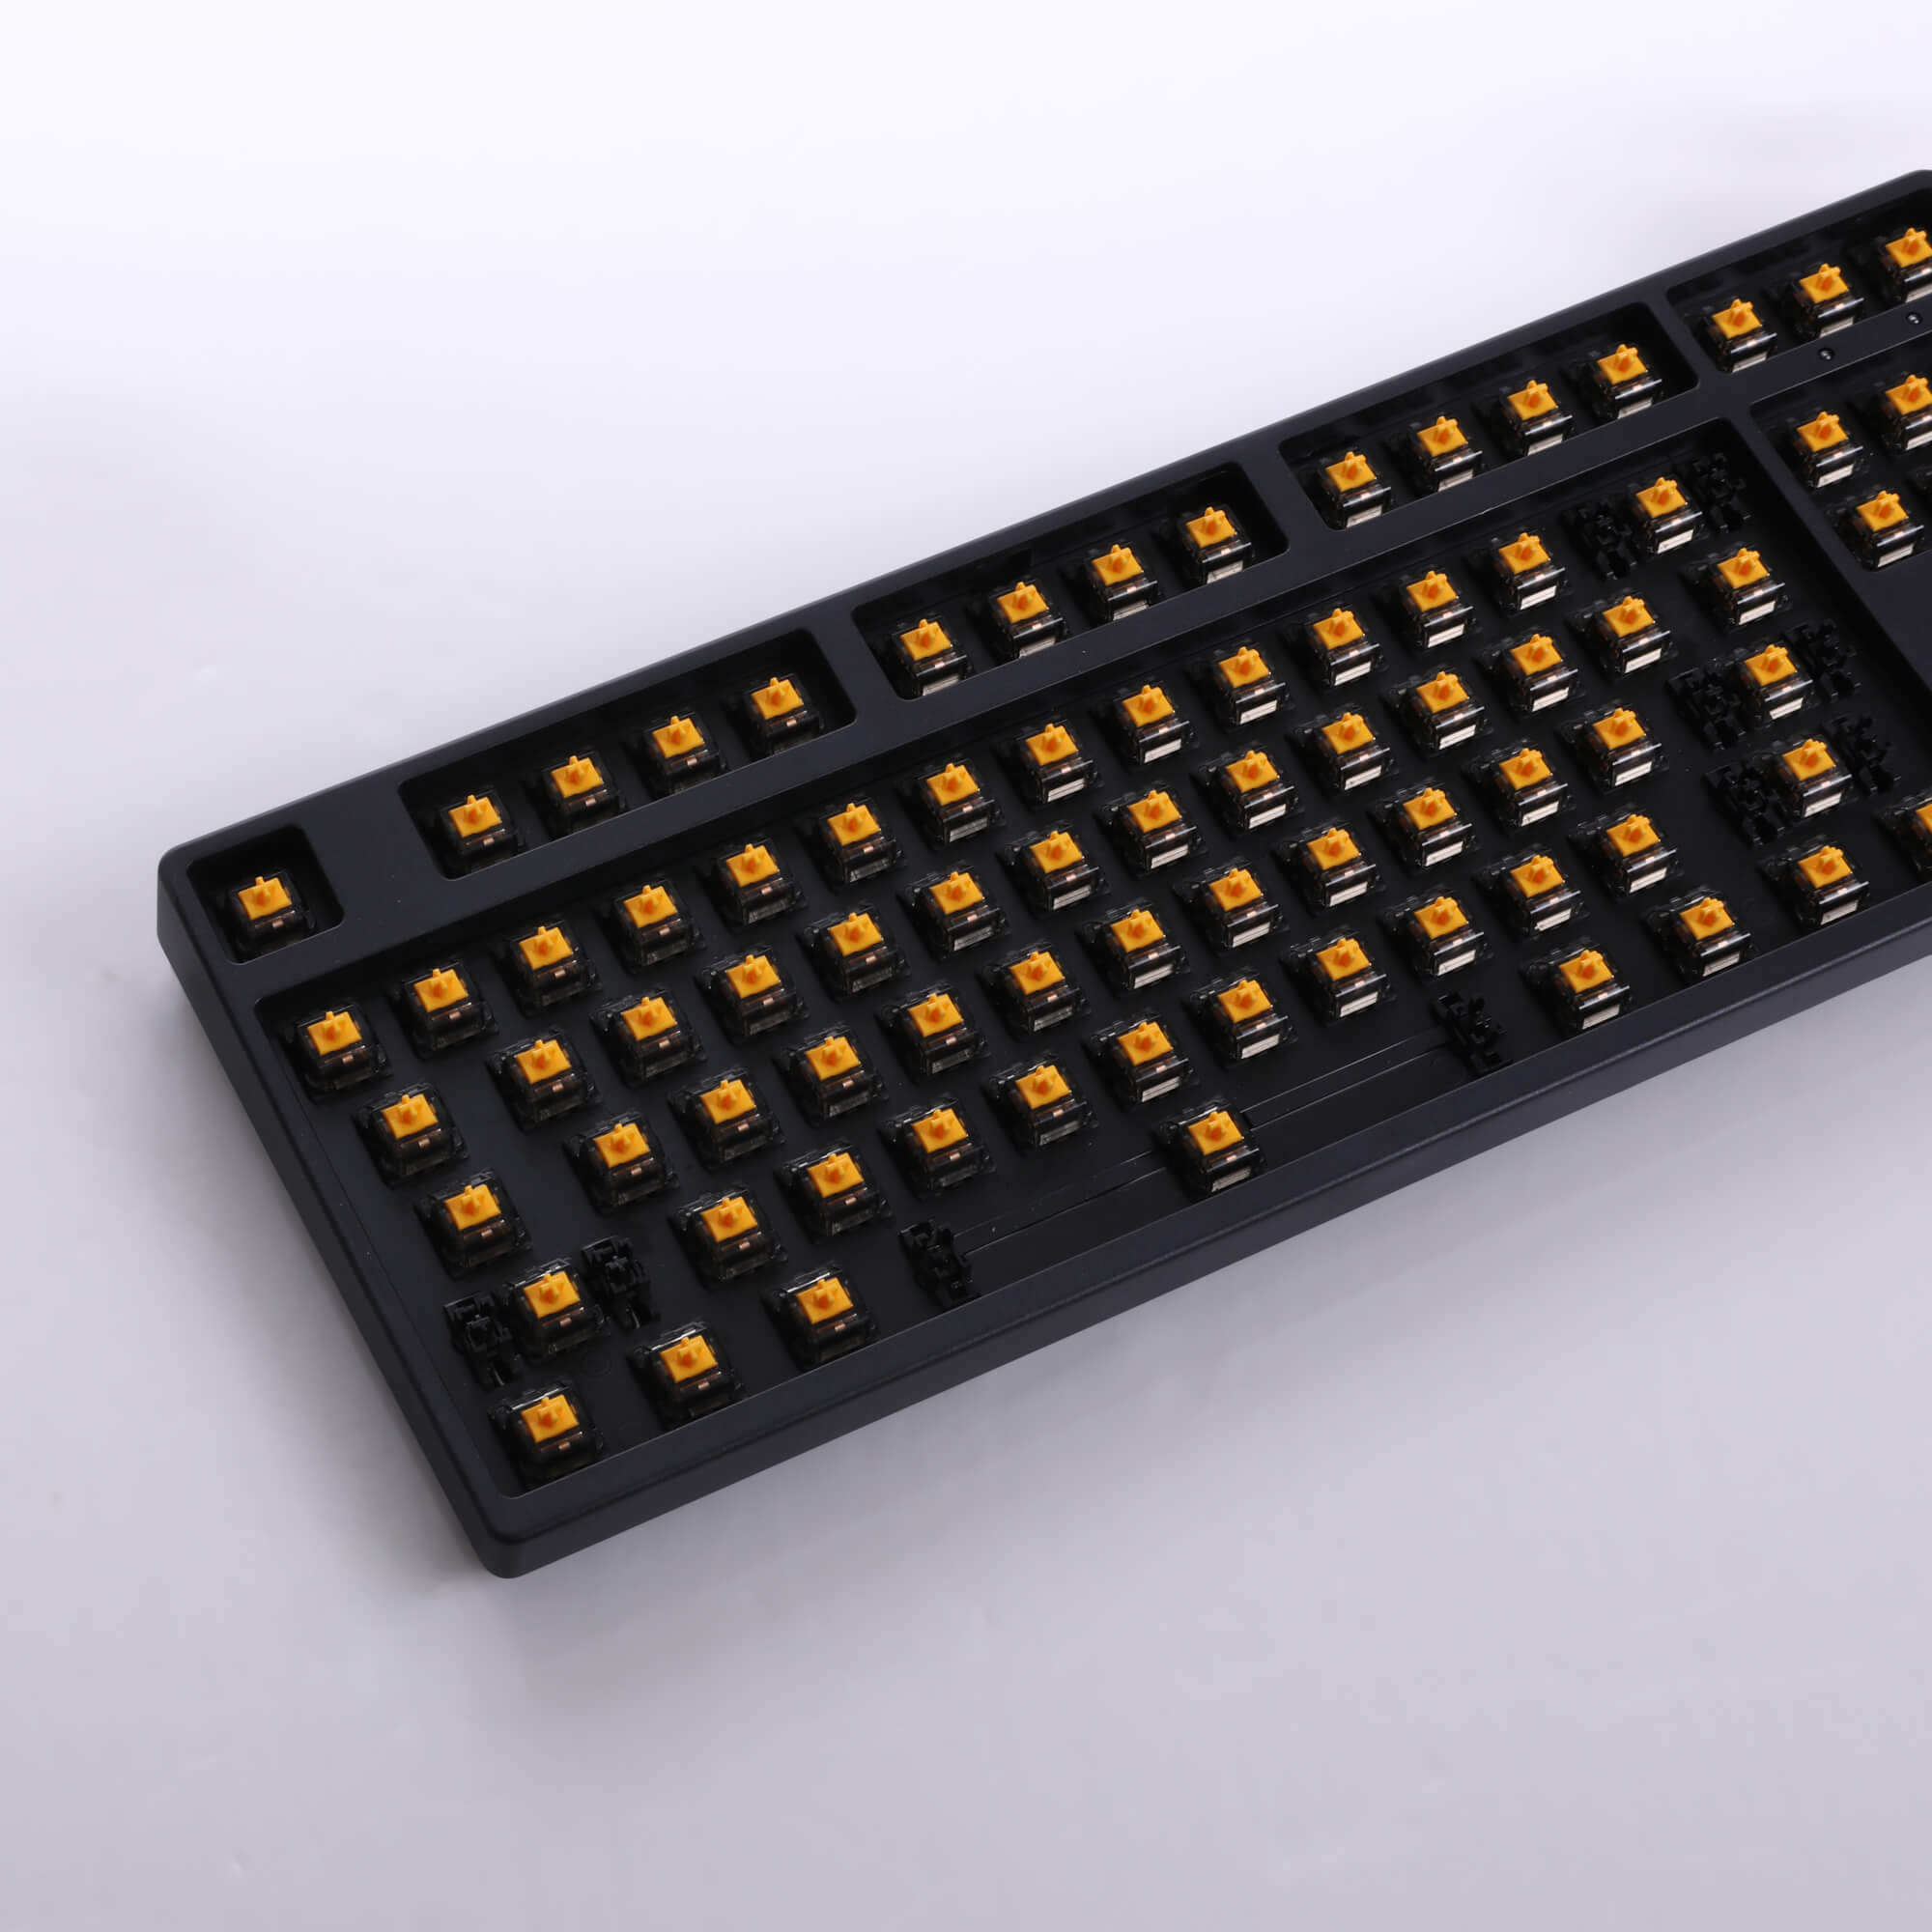 Aflion Shadow keyboard switches, featuring sleek black housings that add a touch of elegance and mystery to your typing setup. Installed on a barebones keyboard.